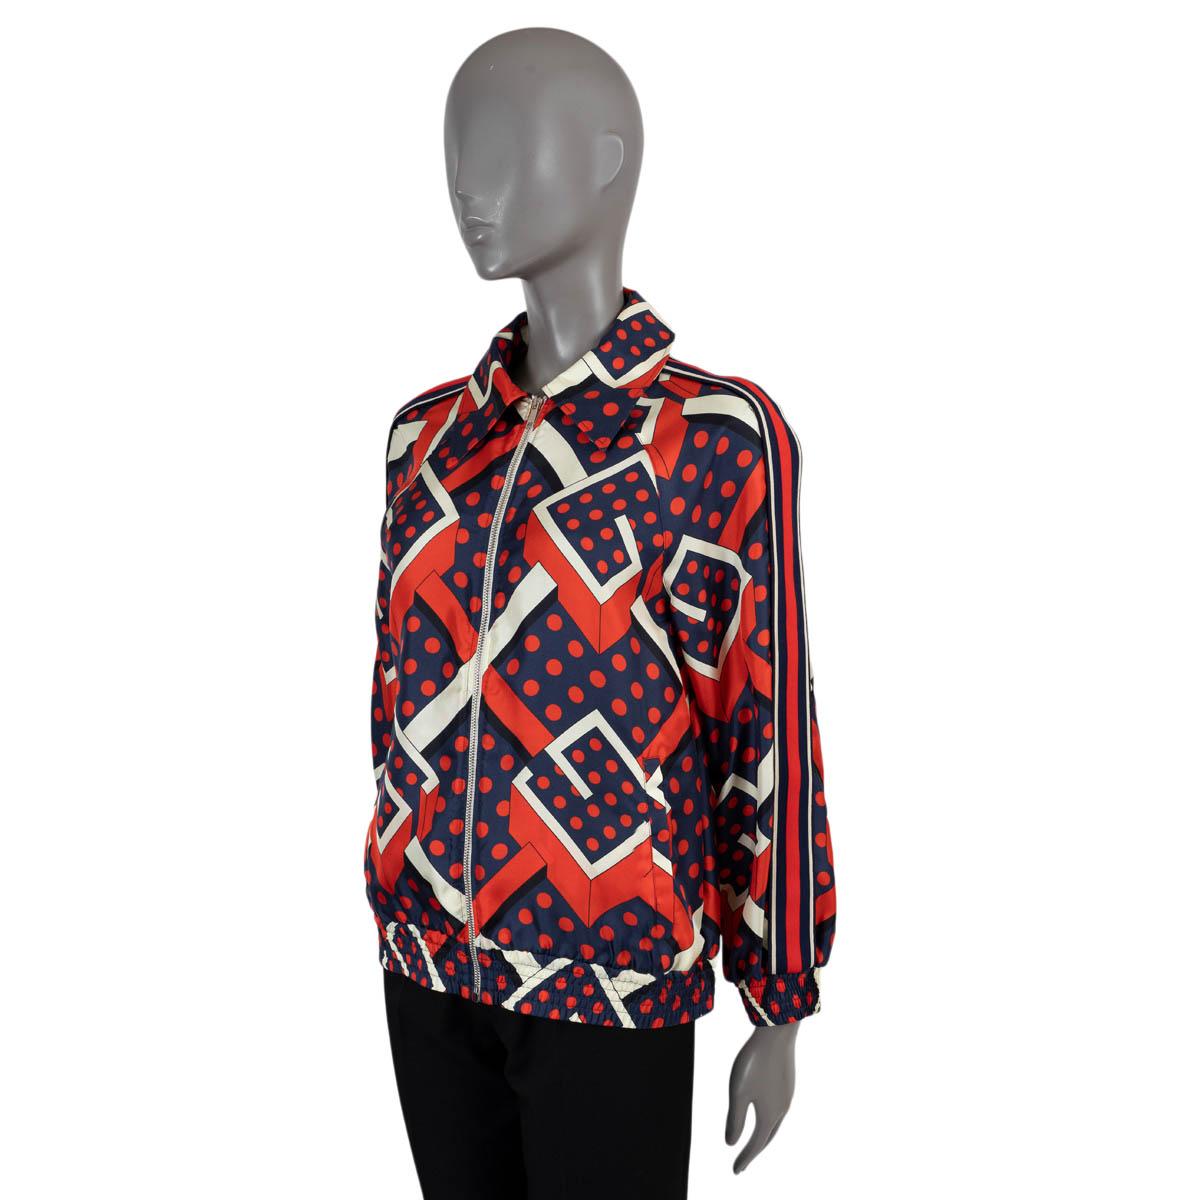 100% authentic Gucci G Dot Labyrinth print jacket in red, navy blue and white silk (100%). Features a pointed collar, web stripe down the sleeves, elastic cuffs and two slant pockets. Has been worn and is in excellent condition.

2021